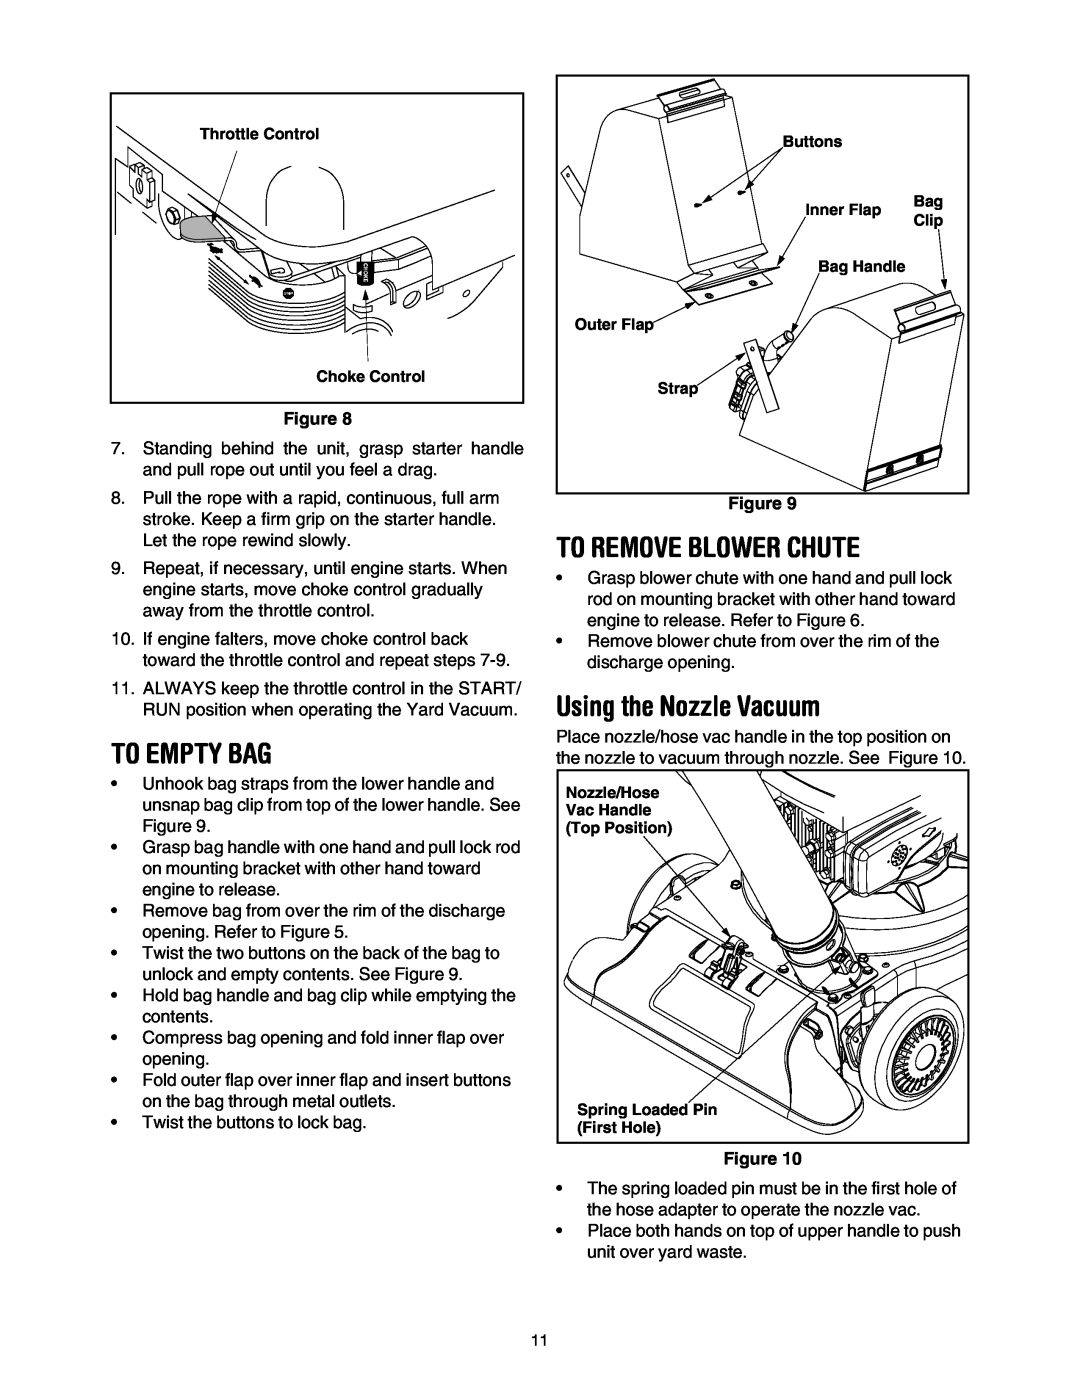 Sears 247.77055 operating instructions To Empty Bag, To Remove Blower Chute, Using the Nozzle Vacuum 